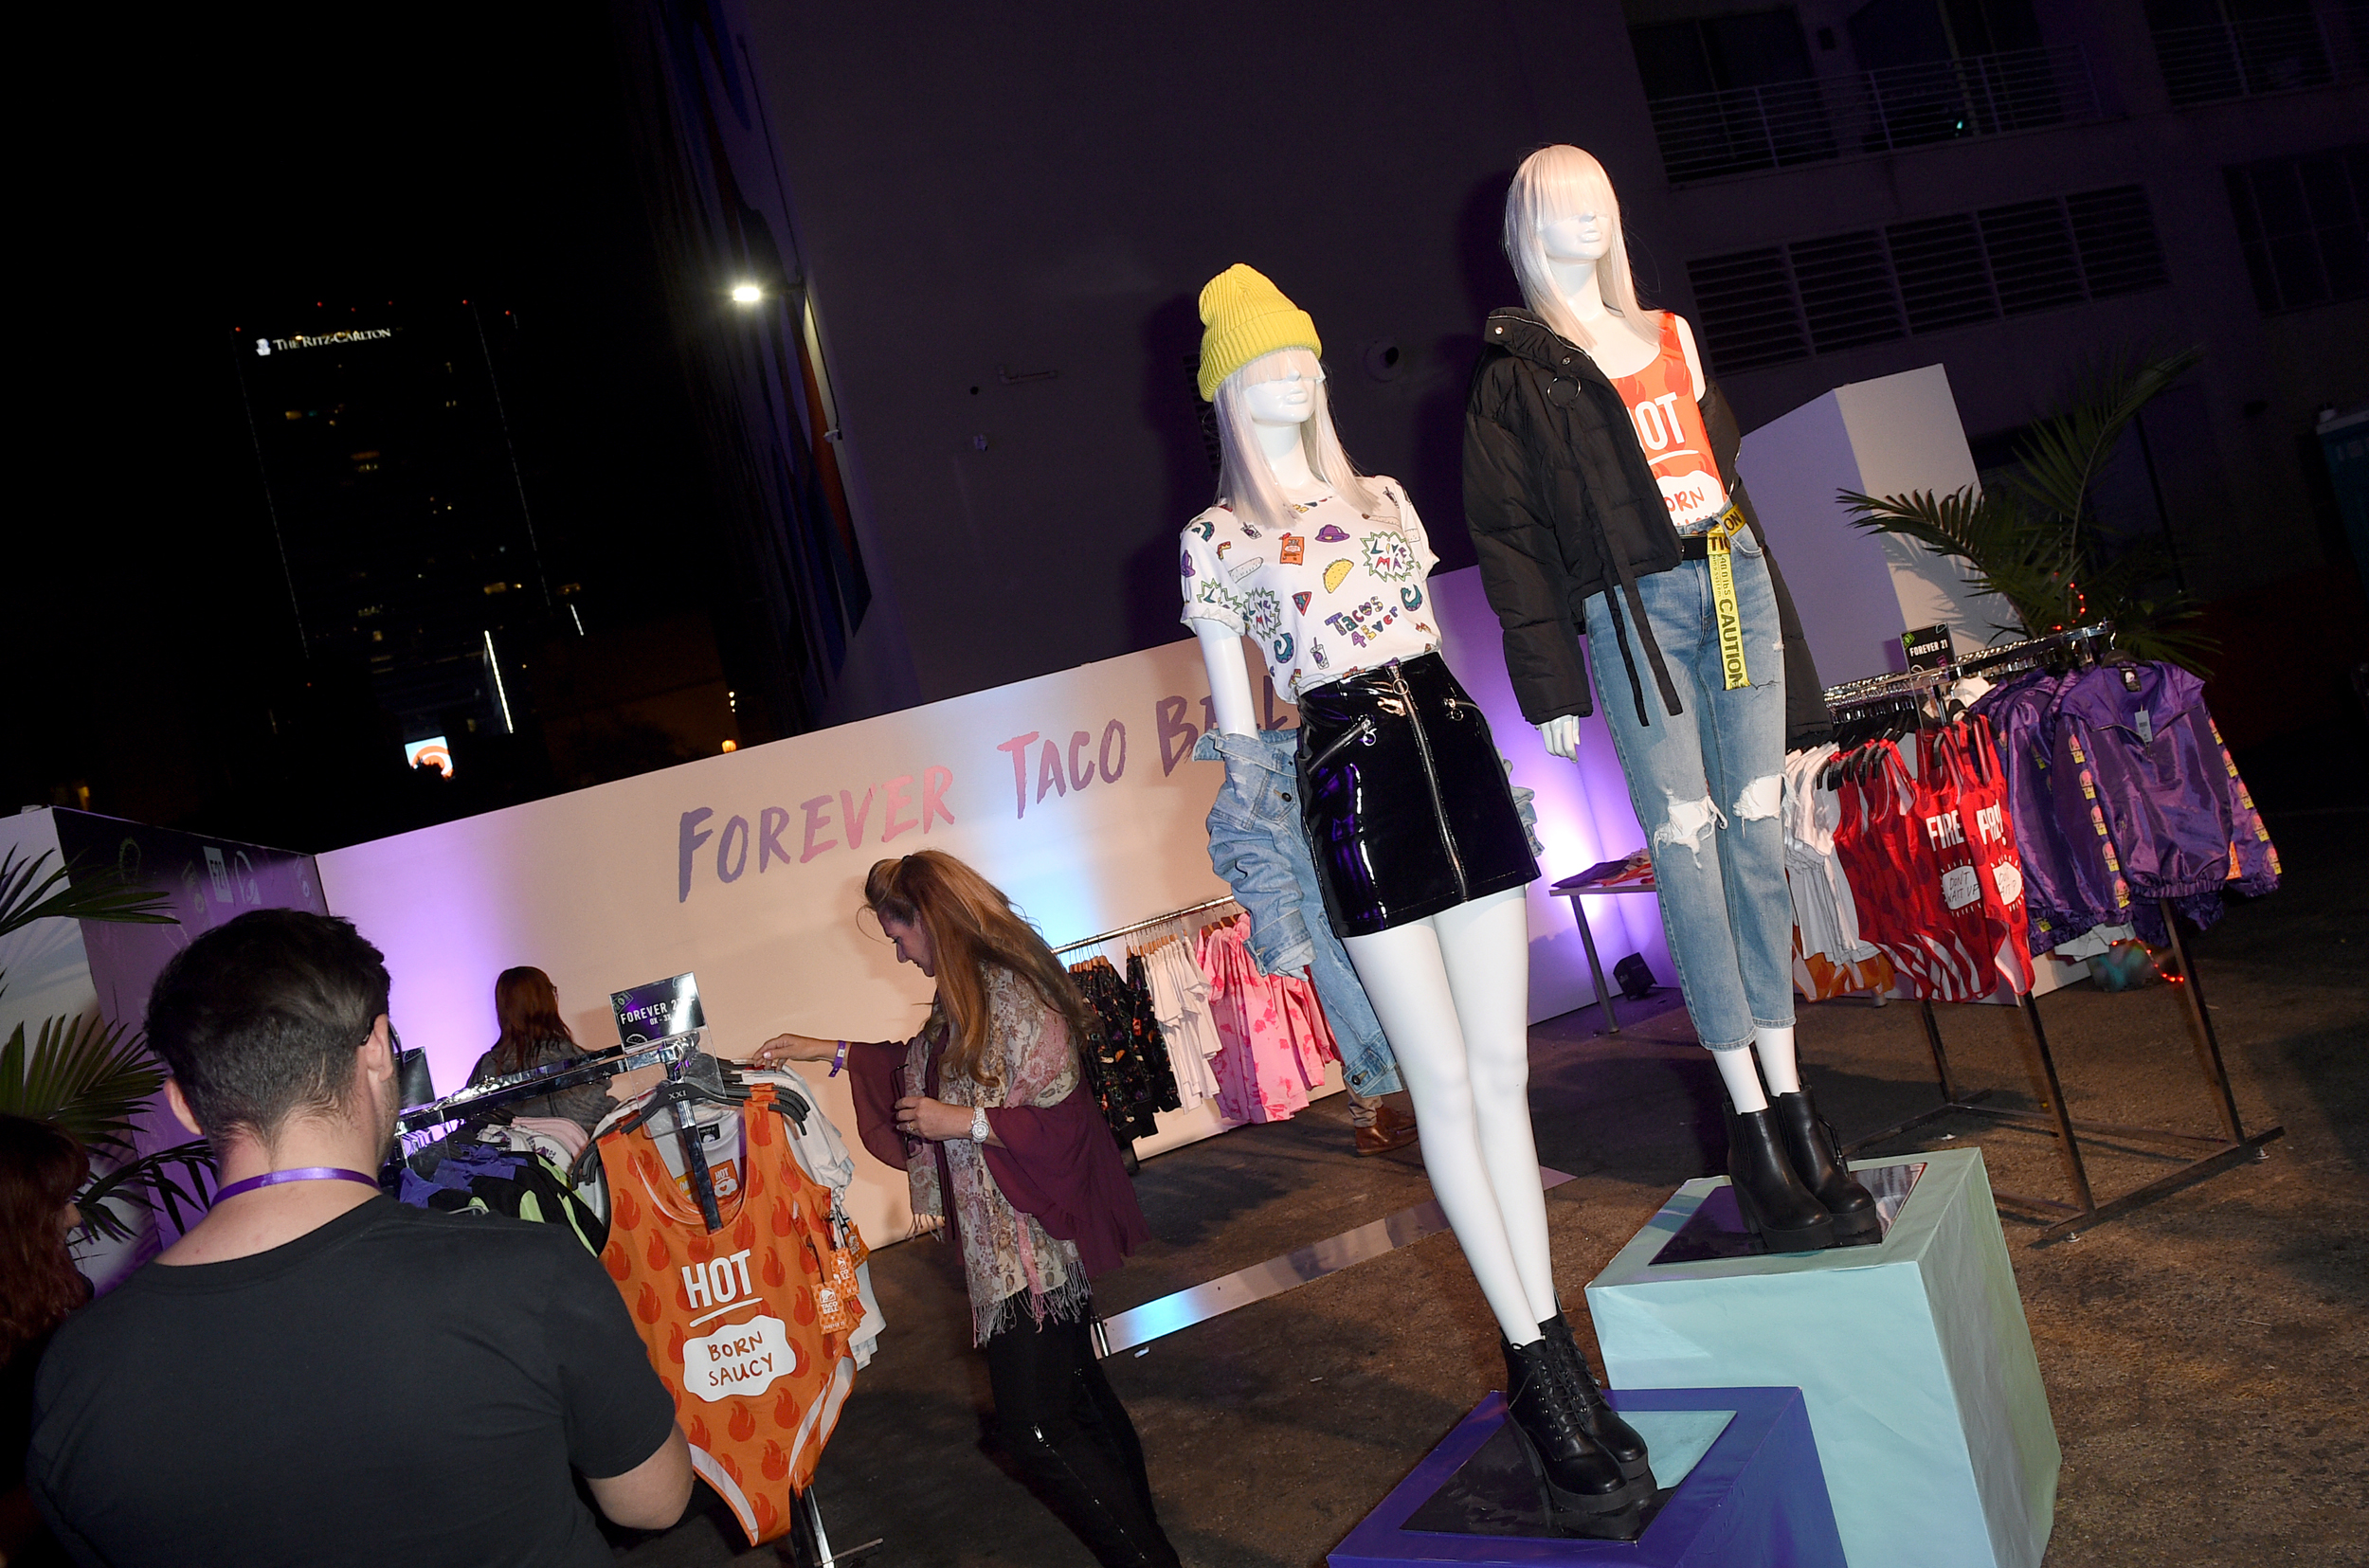 PHOTO: A Taco Bell pop up shop is seen at the fashion event in Los Angeles.
